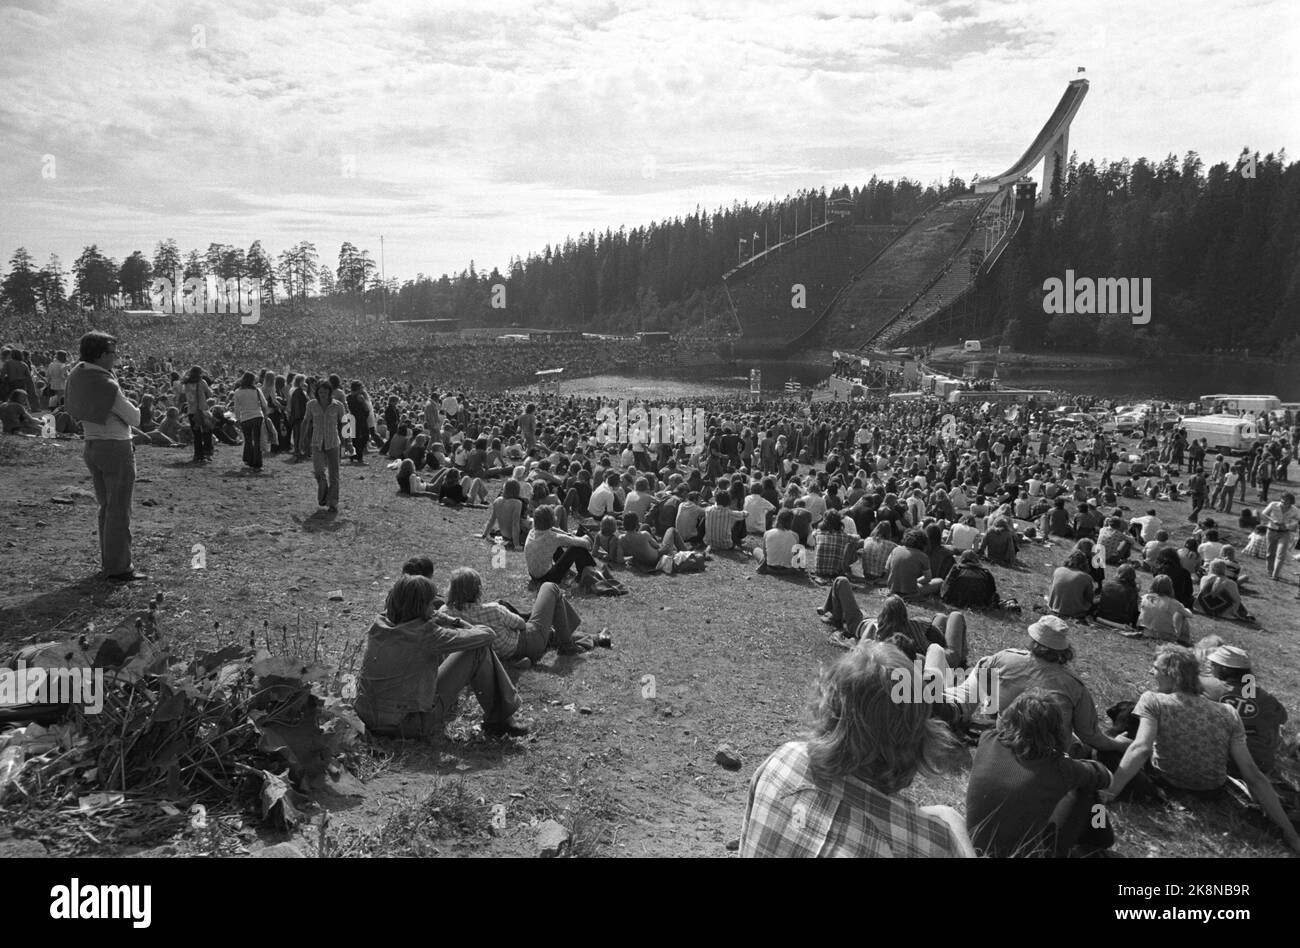 Oslo June 17, 1973. Rock concert in Holmenkollen, the Ragnarock event under the auspices of Centralfilm A/S was a great success. The event took place from 1300 until midnight. The first group out was the Bergen Group Saft in interaction with Hardangerfler Sigbjørn Bernhoft Osa. The tickets cost NOK 20 and a movie from the event is scheduled to be shown 3-4 months after the concert. Photo: Current / NTB Stock Photo